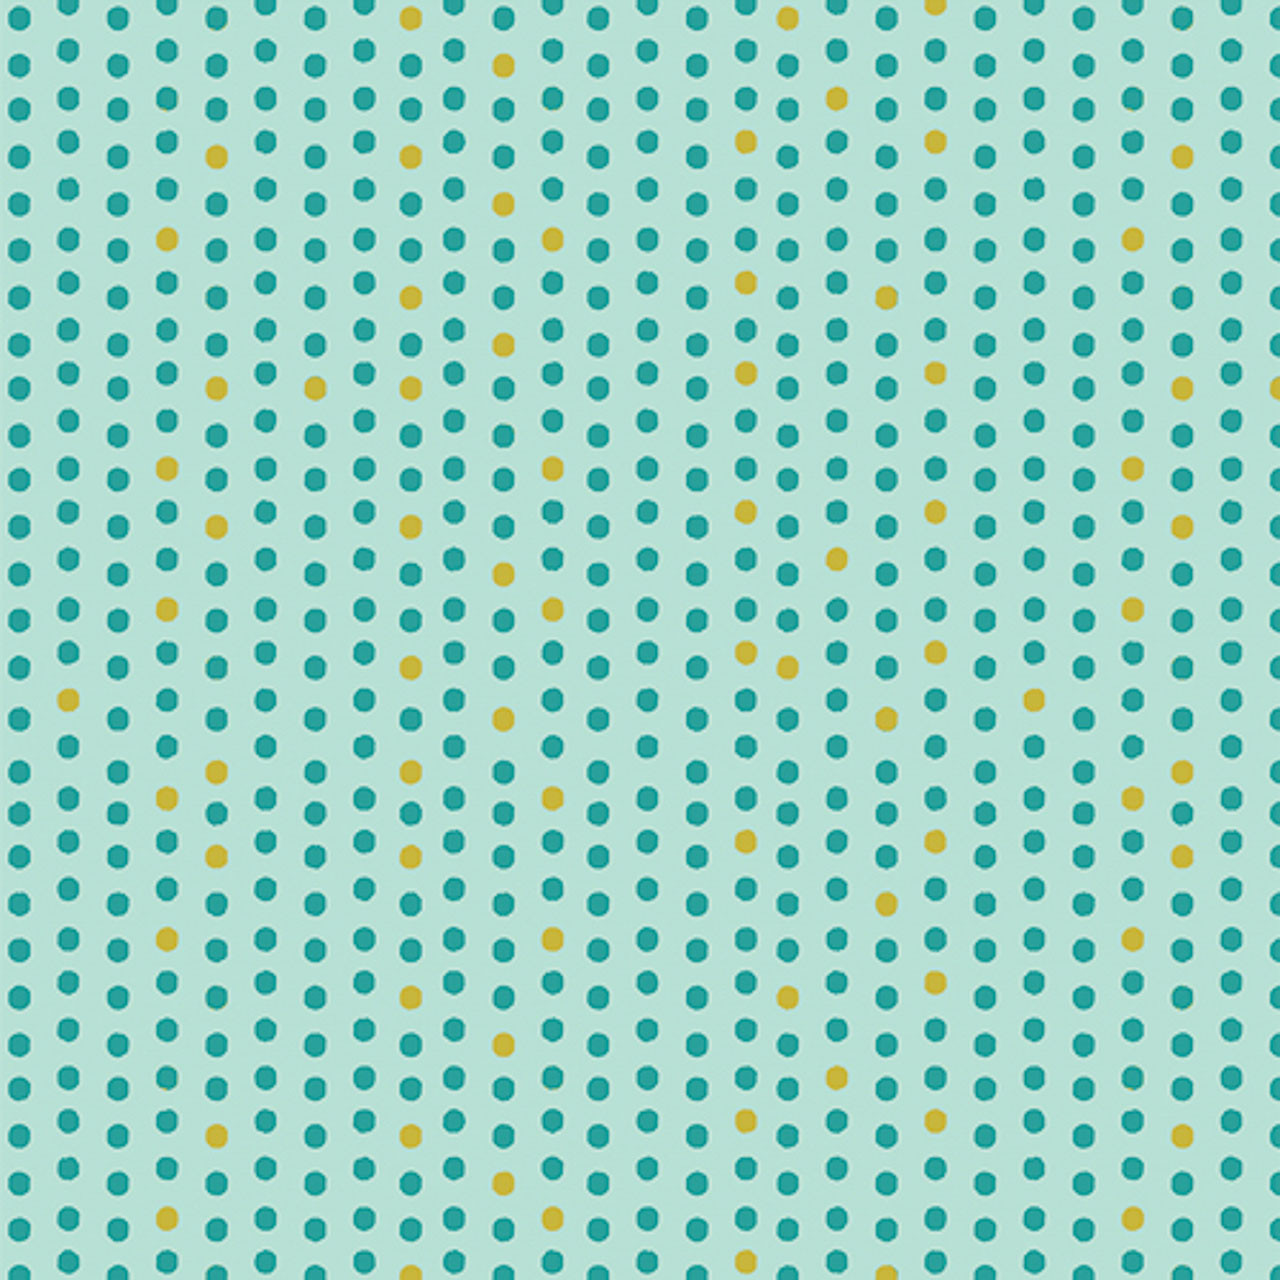 Turquoise 100% cotton fabric with yellow dot pattern from Art Gallery Fabrics' Path to Discovery collection, named Paw-some Eight.